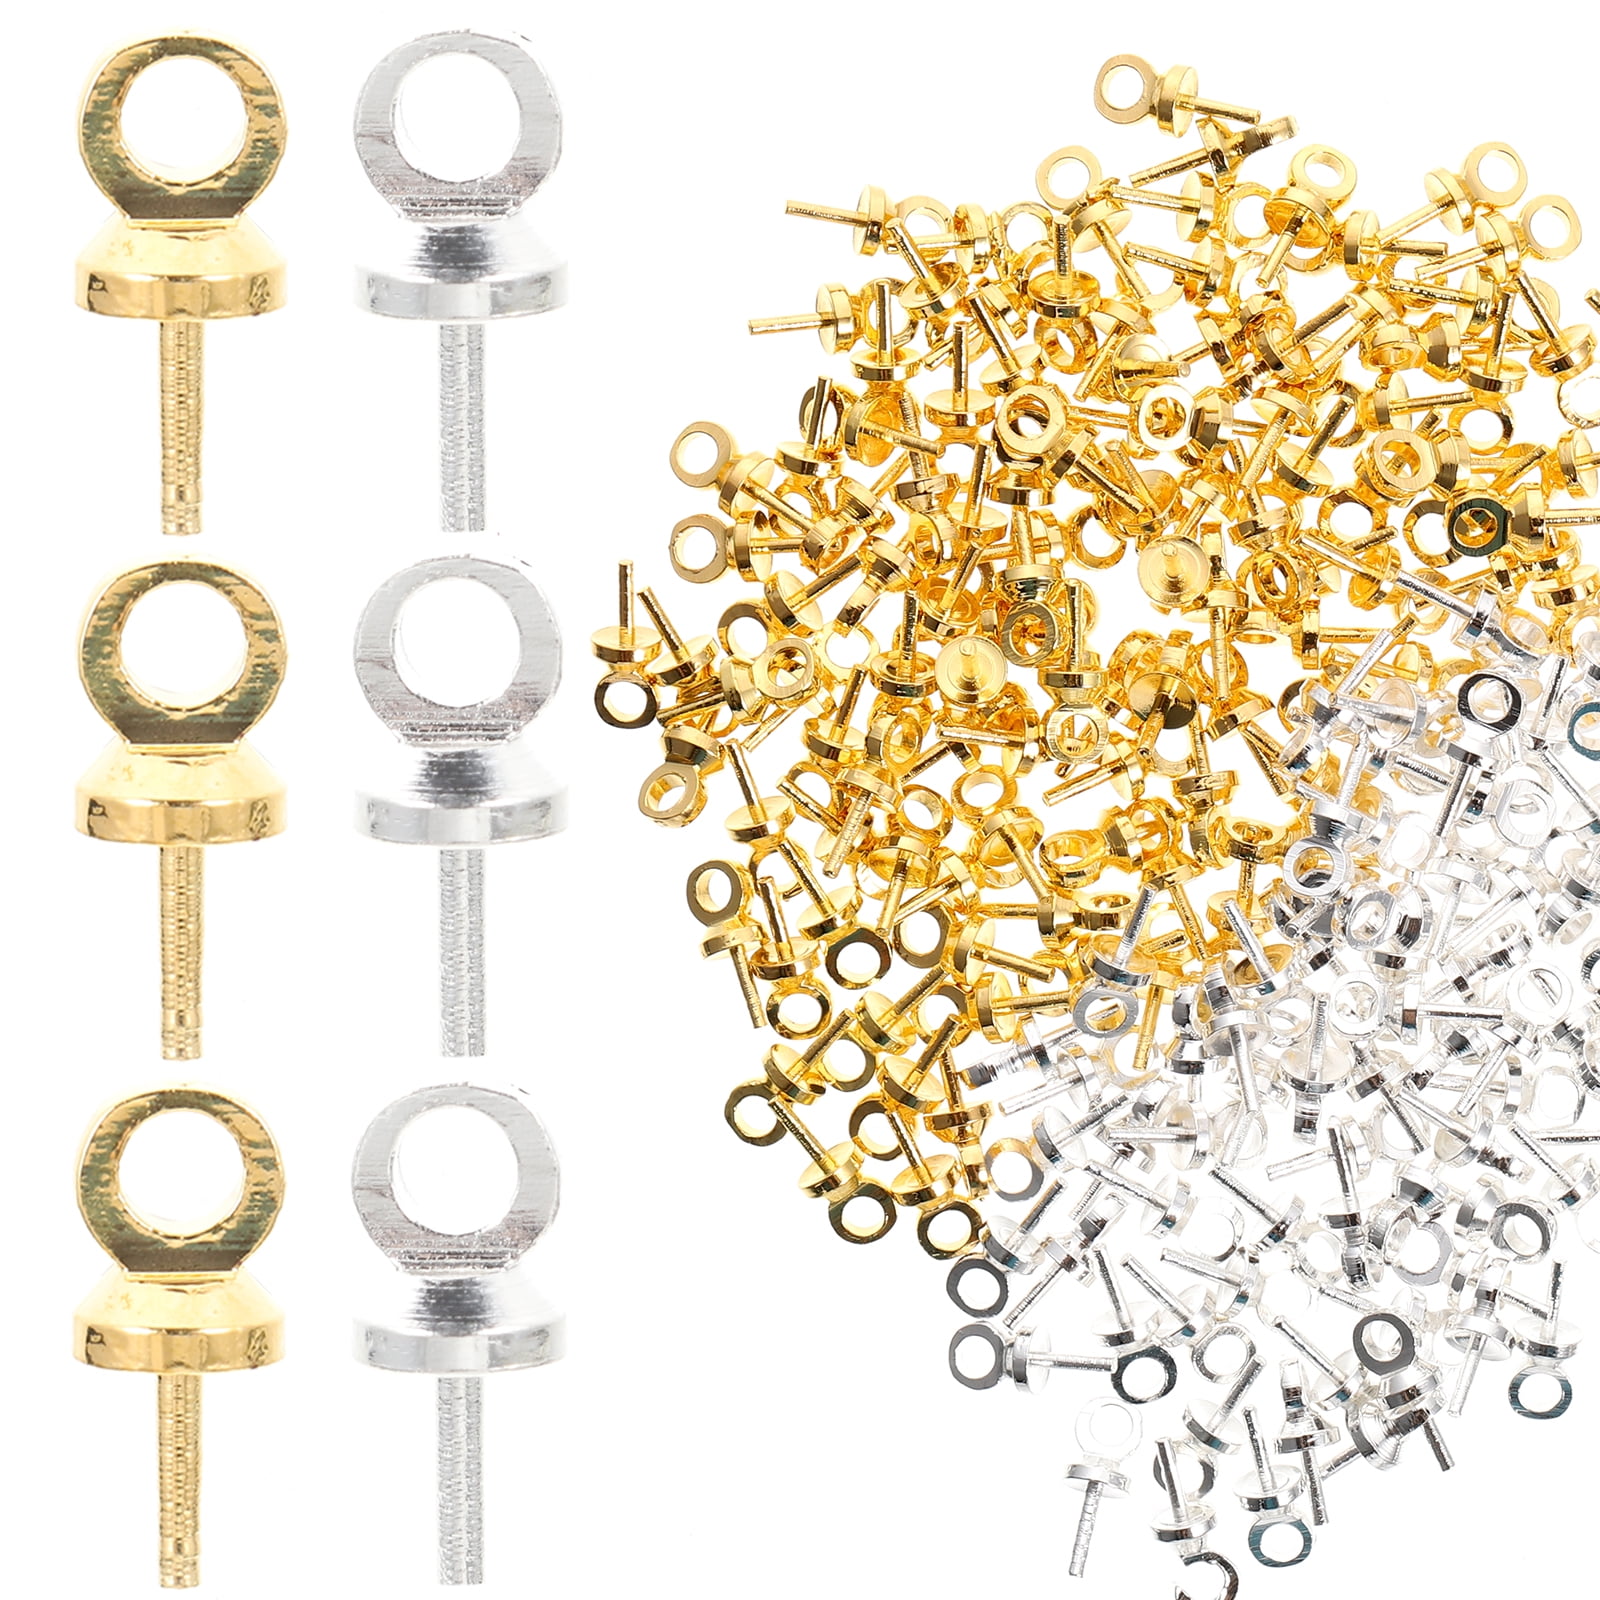 10 Inch Gold Metal Rings Hoops for Crafts Bulk Wholesale 6 Pieces